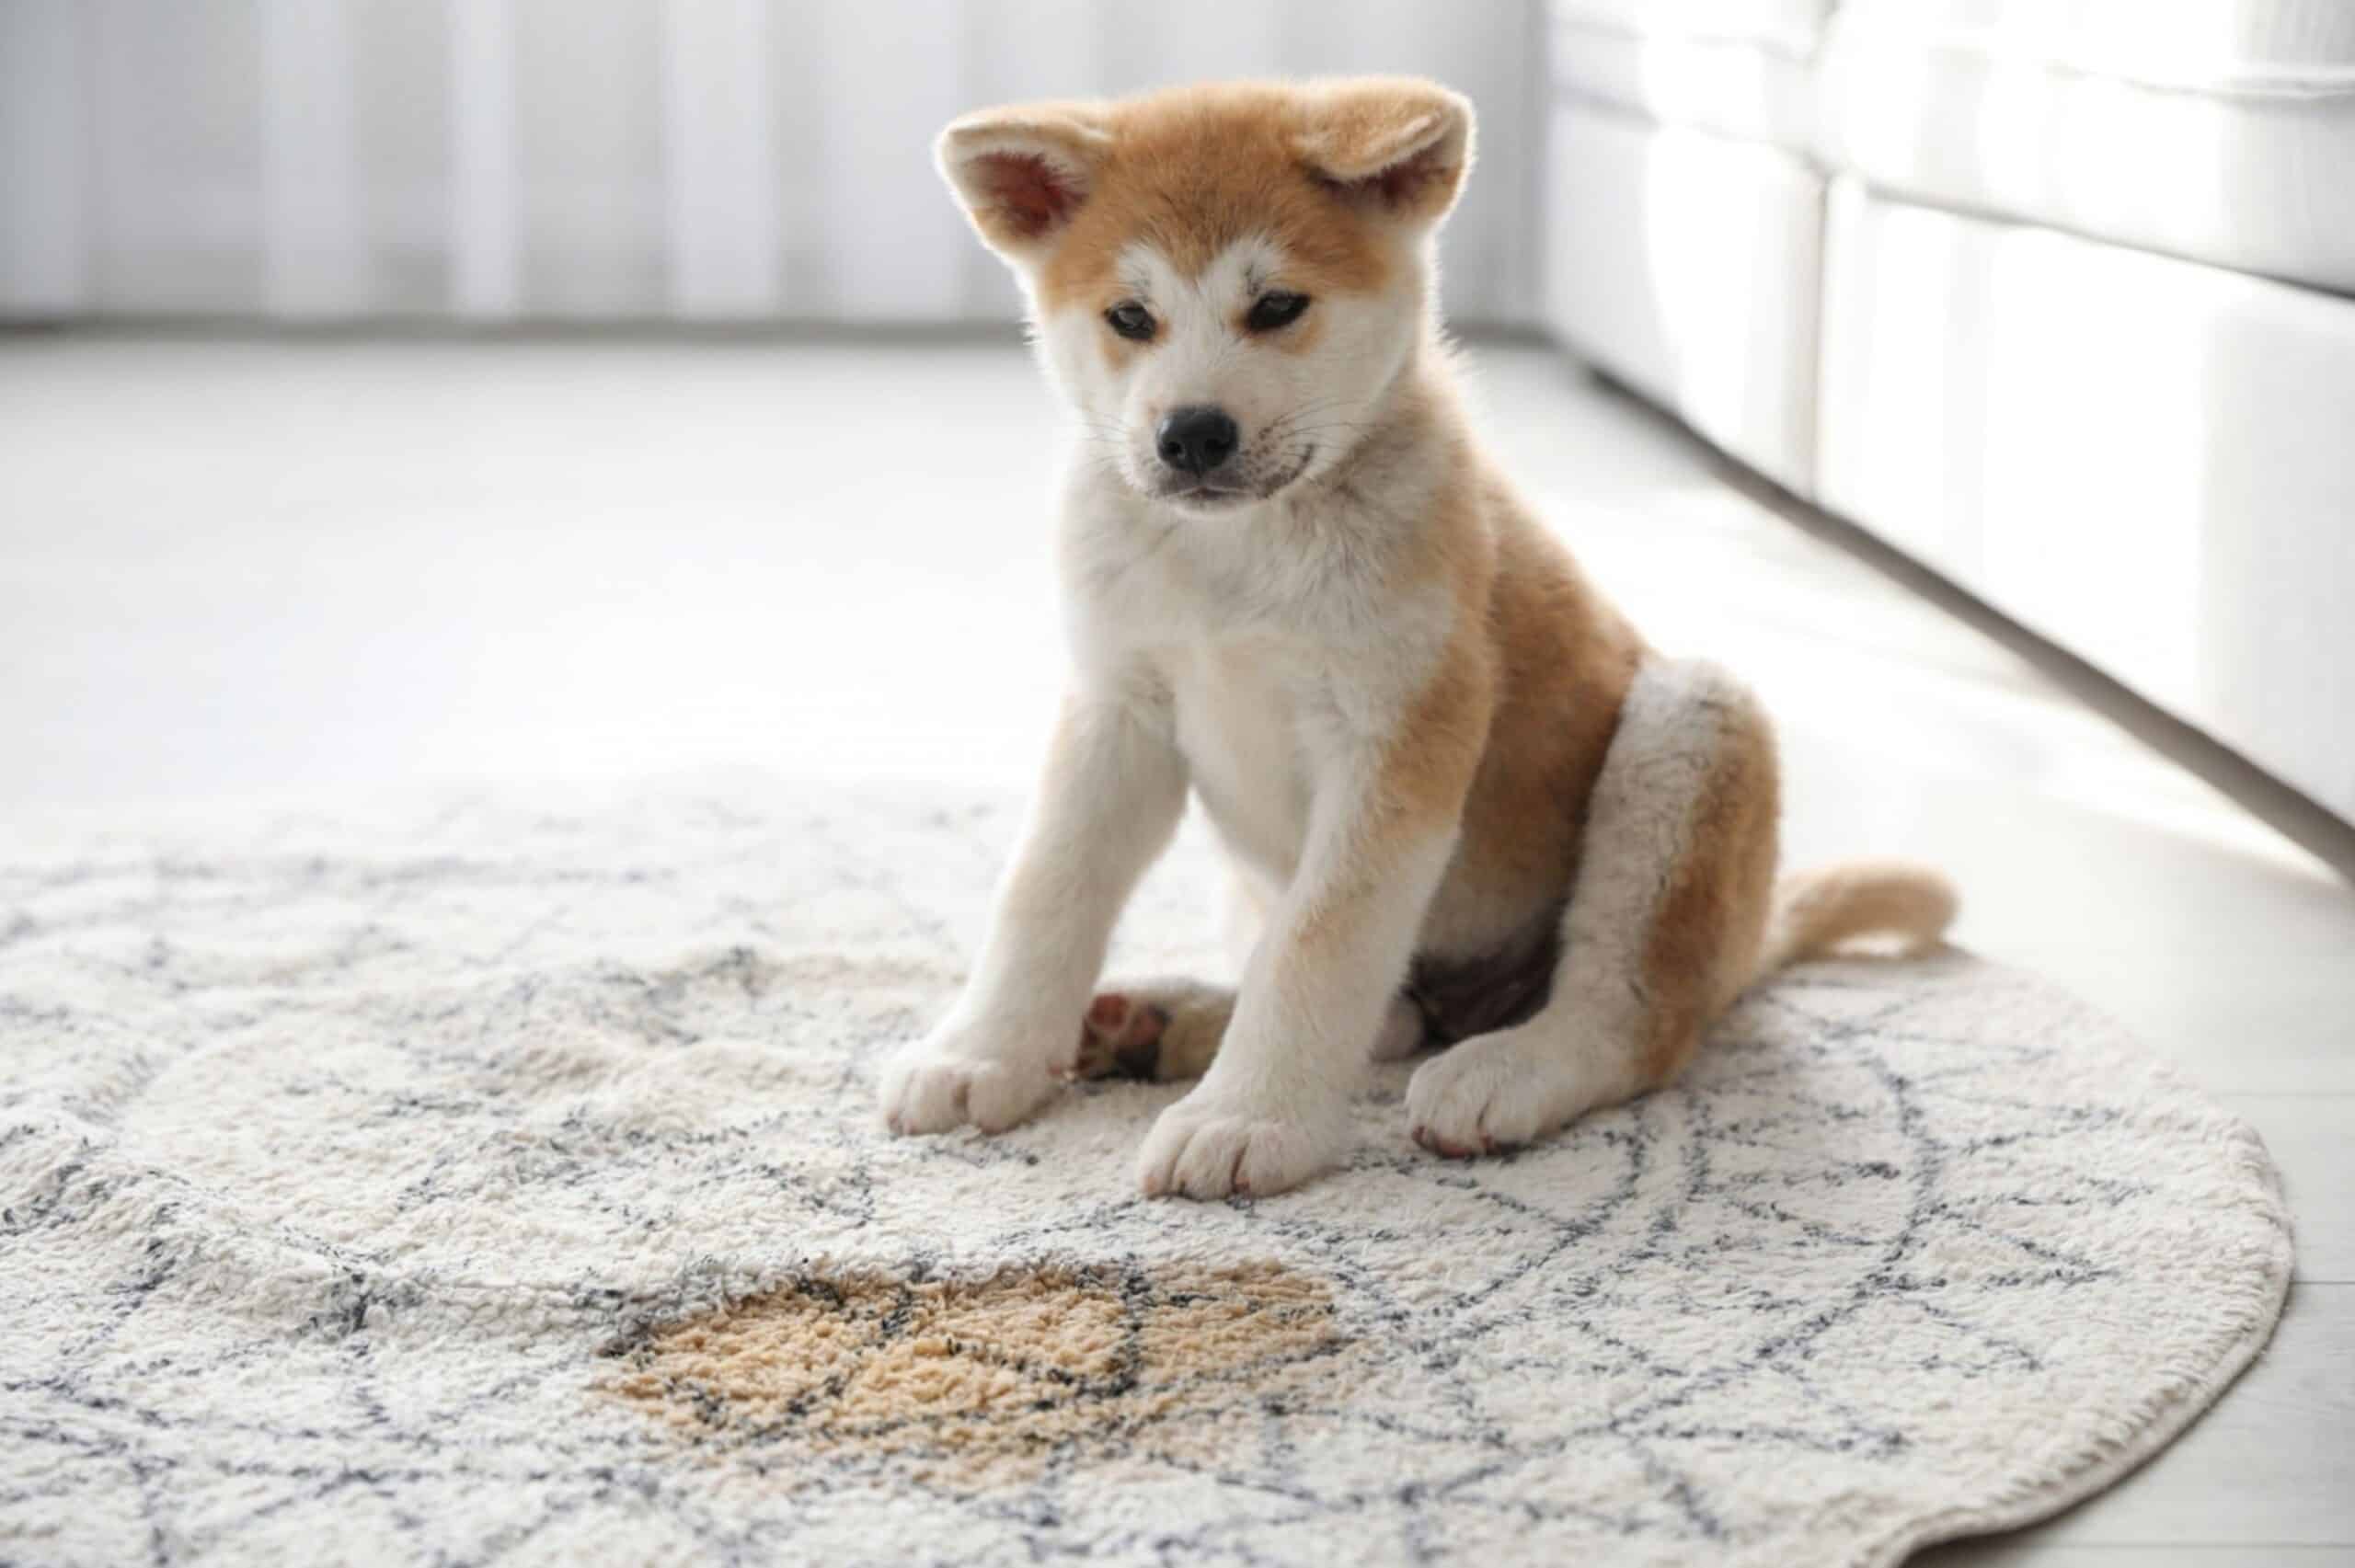 How to Deodorize Carpet Like a Pro Tidyhere Image of a Puppy Near Puddle on Rug